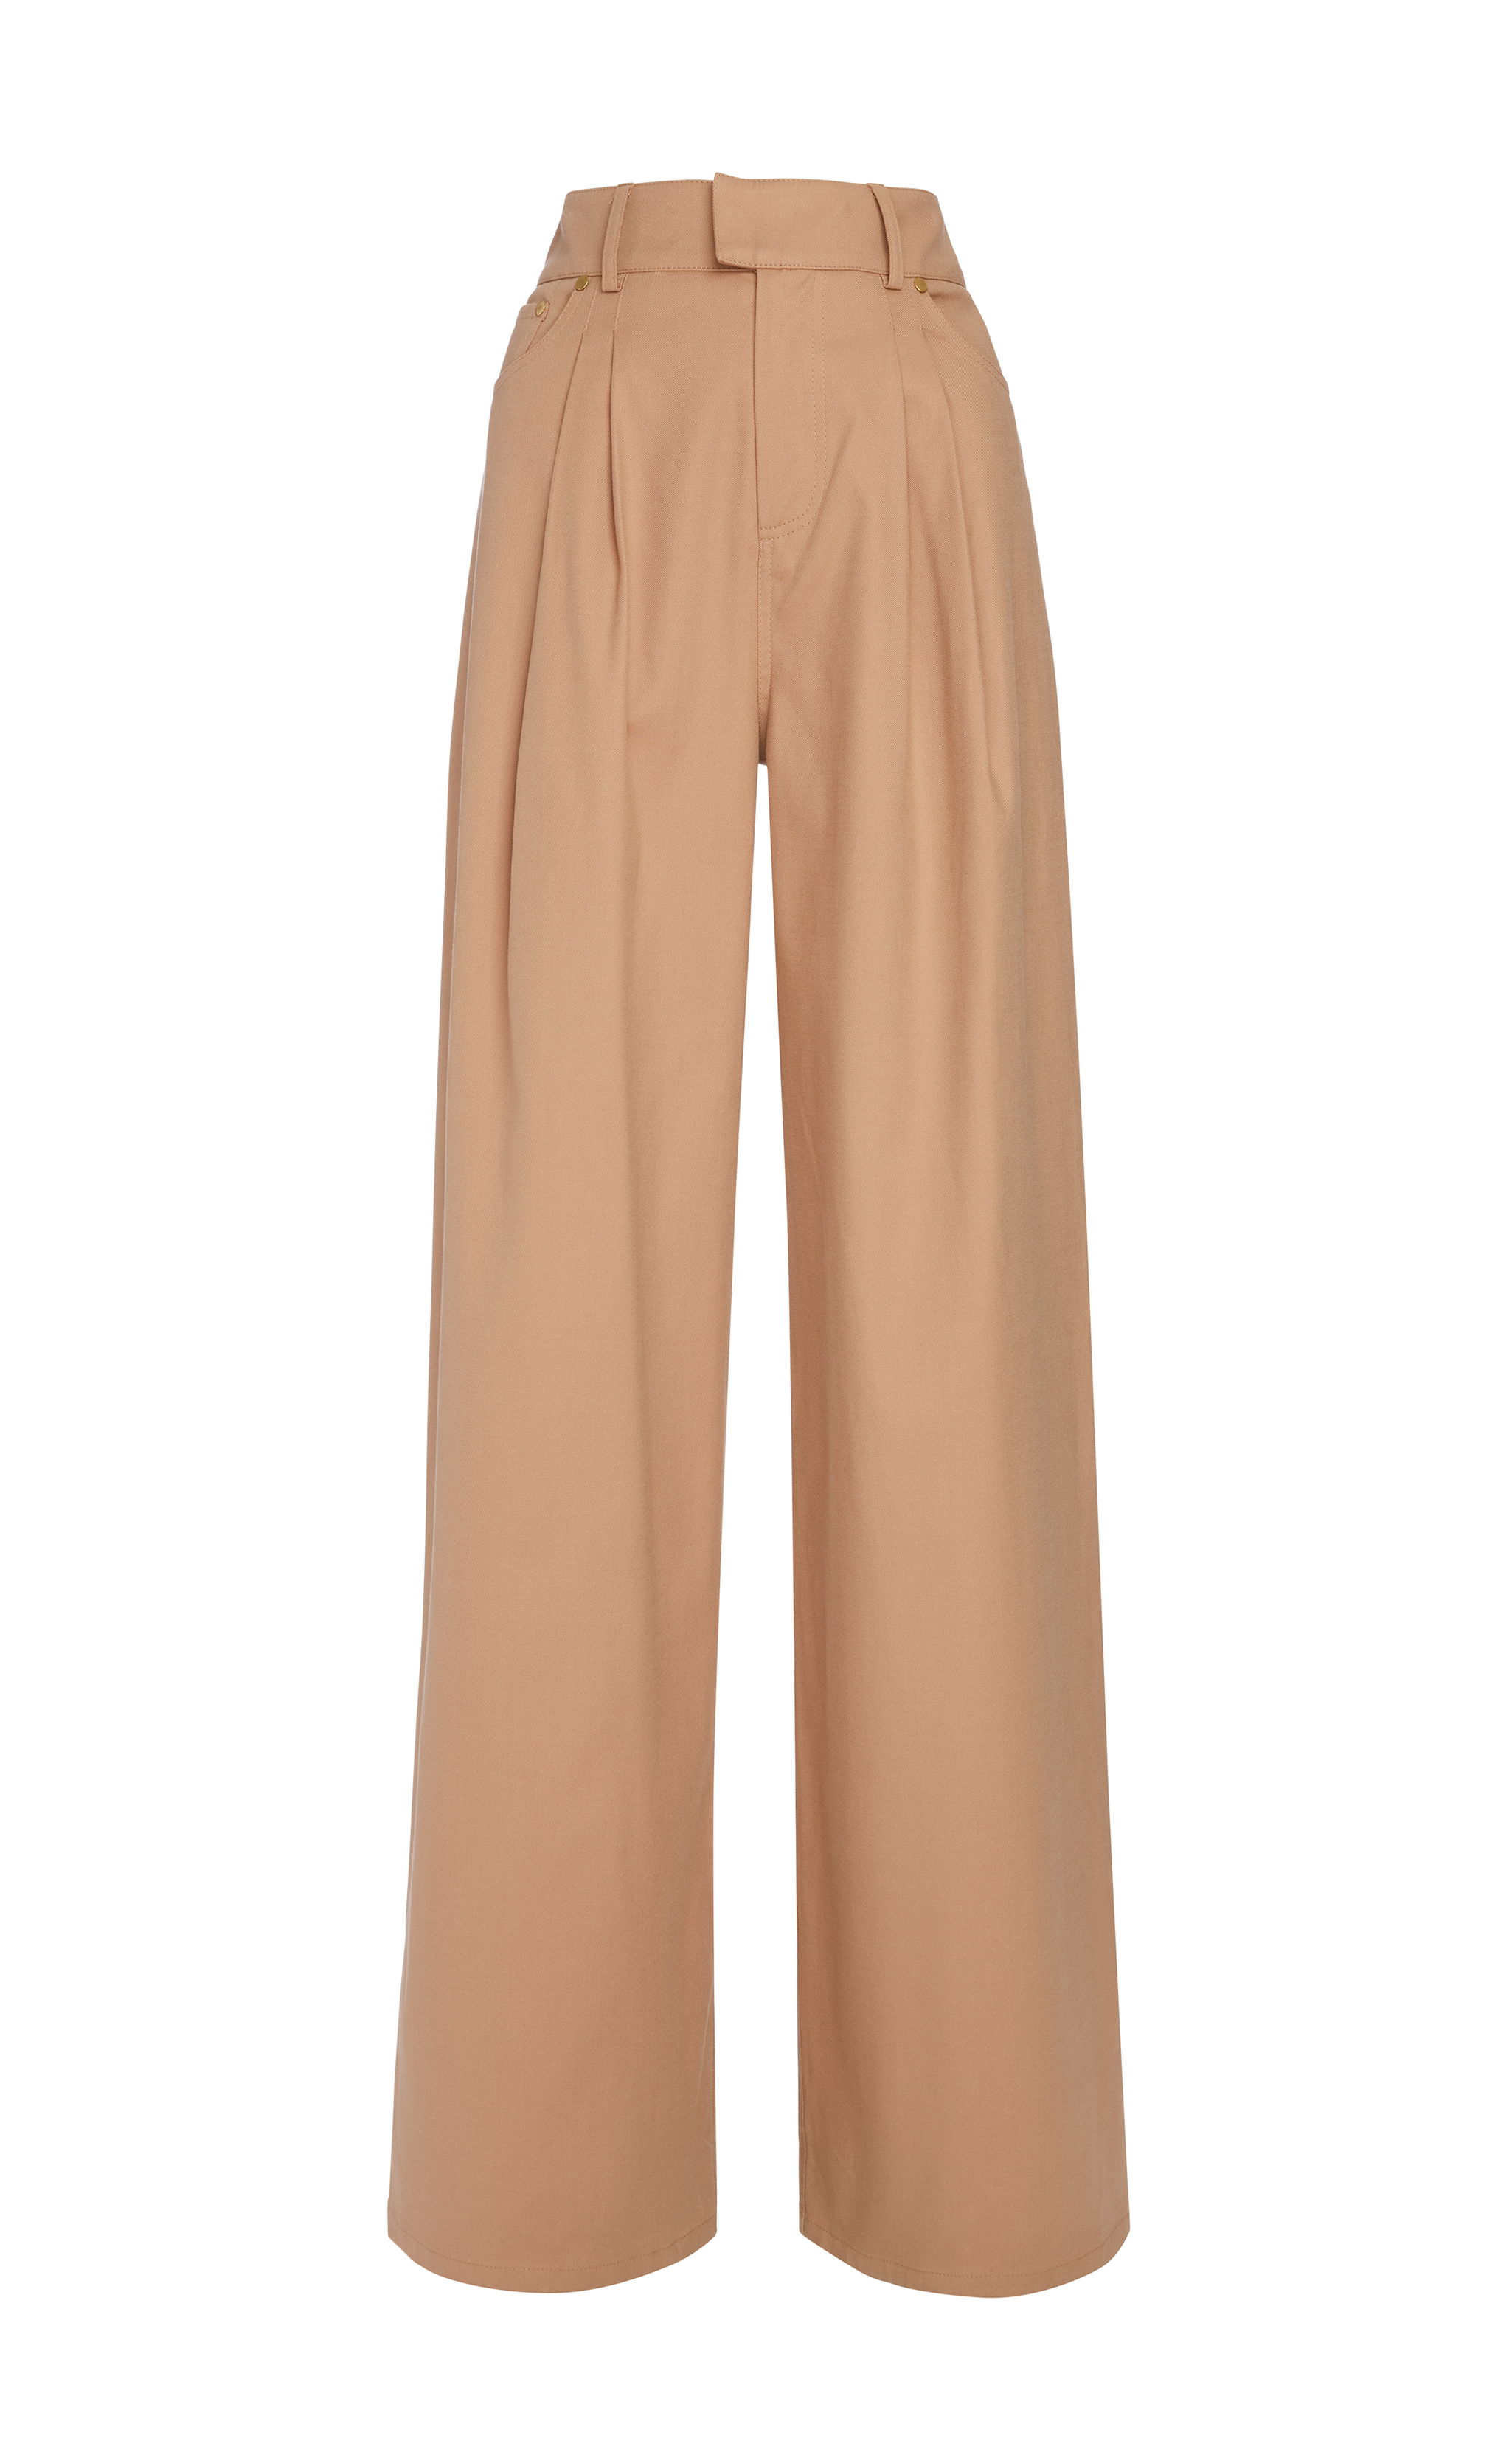 BRITTON TAN TROUSER – Mother of Pearl